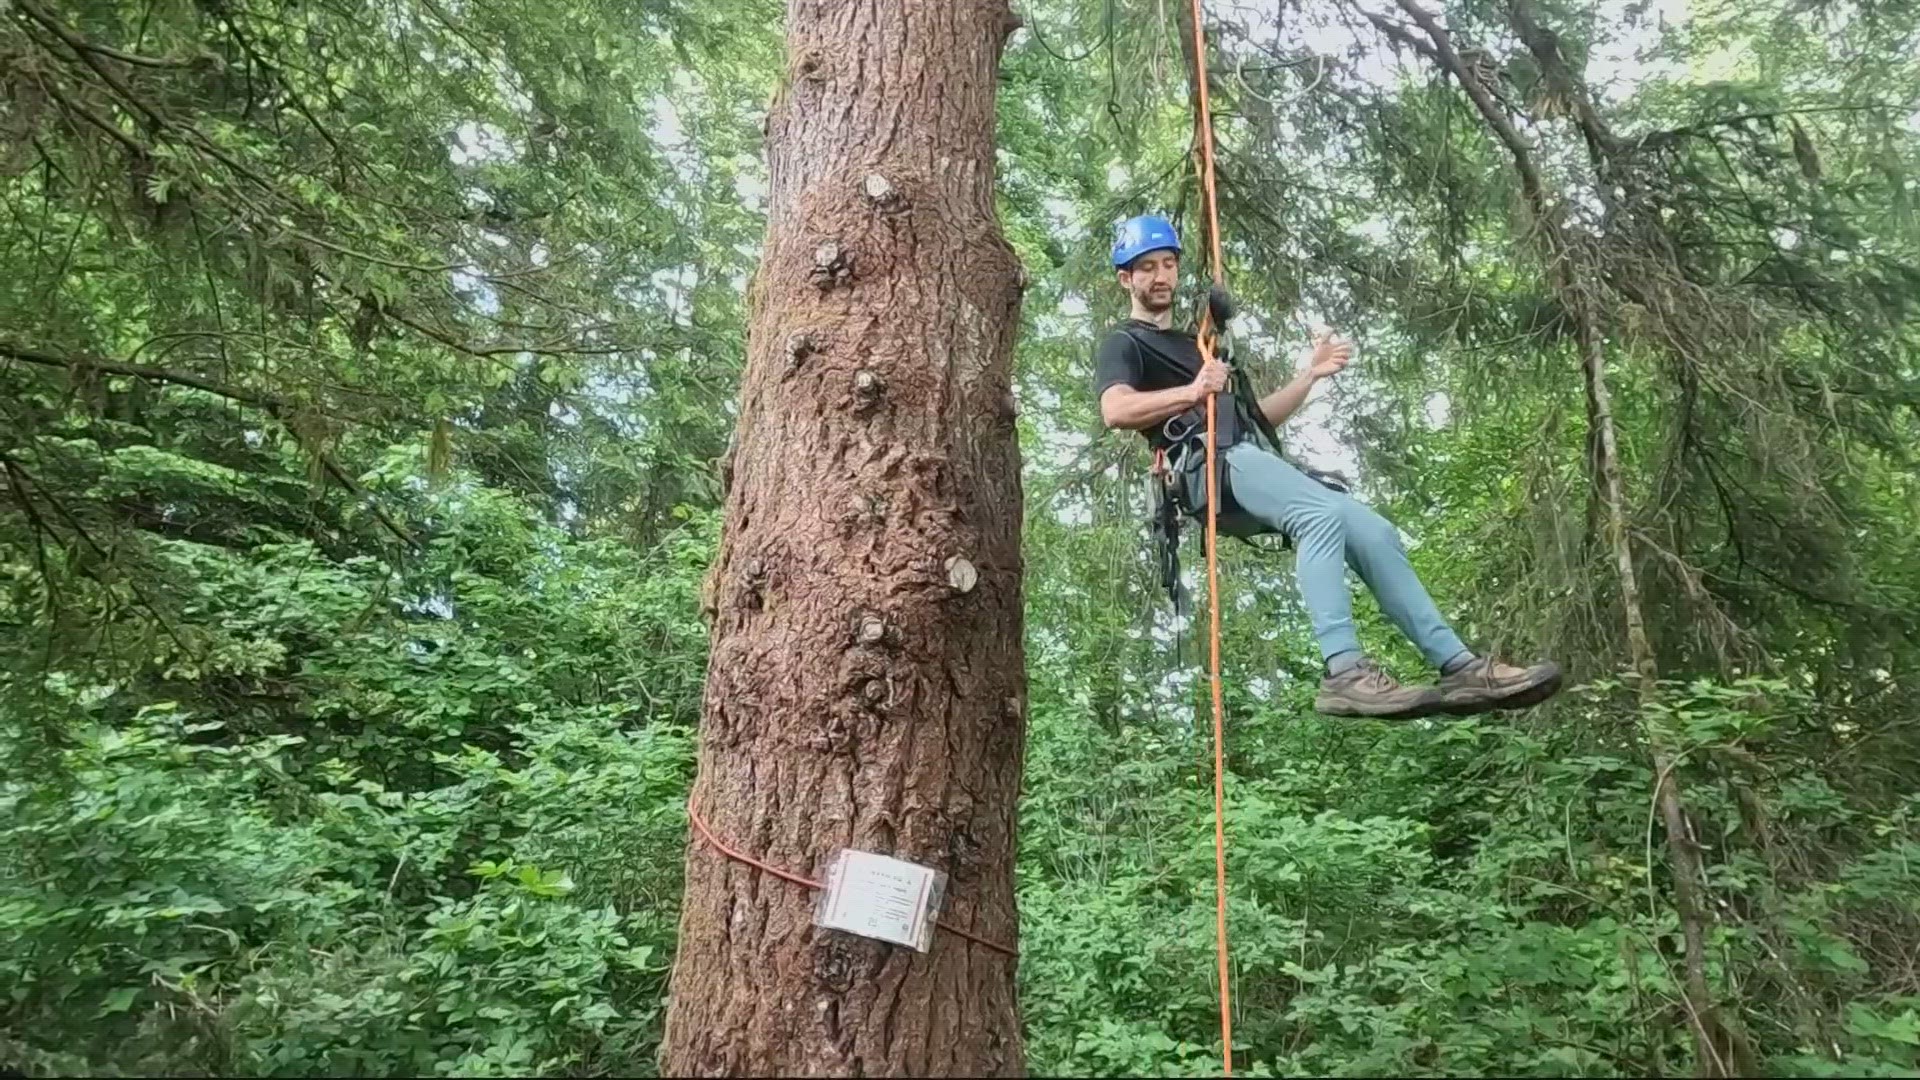 The state park features many activities including tree climbing operated by a private business called "Climbing at Silver Falls".